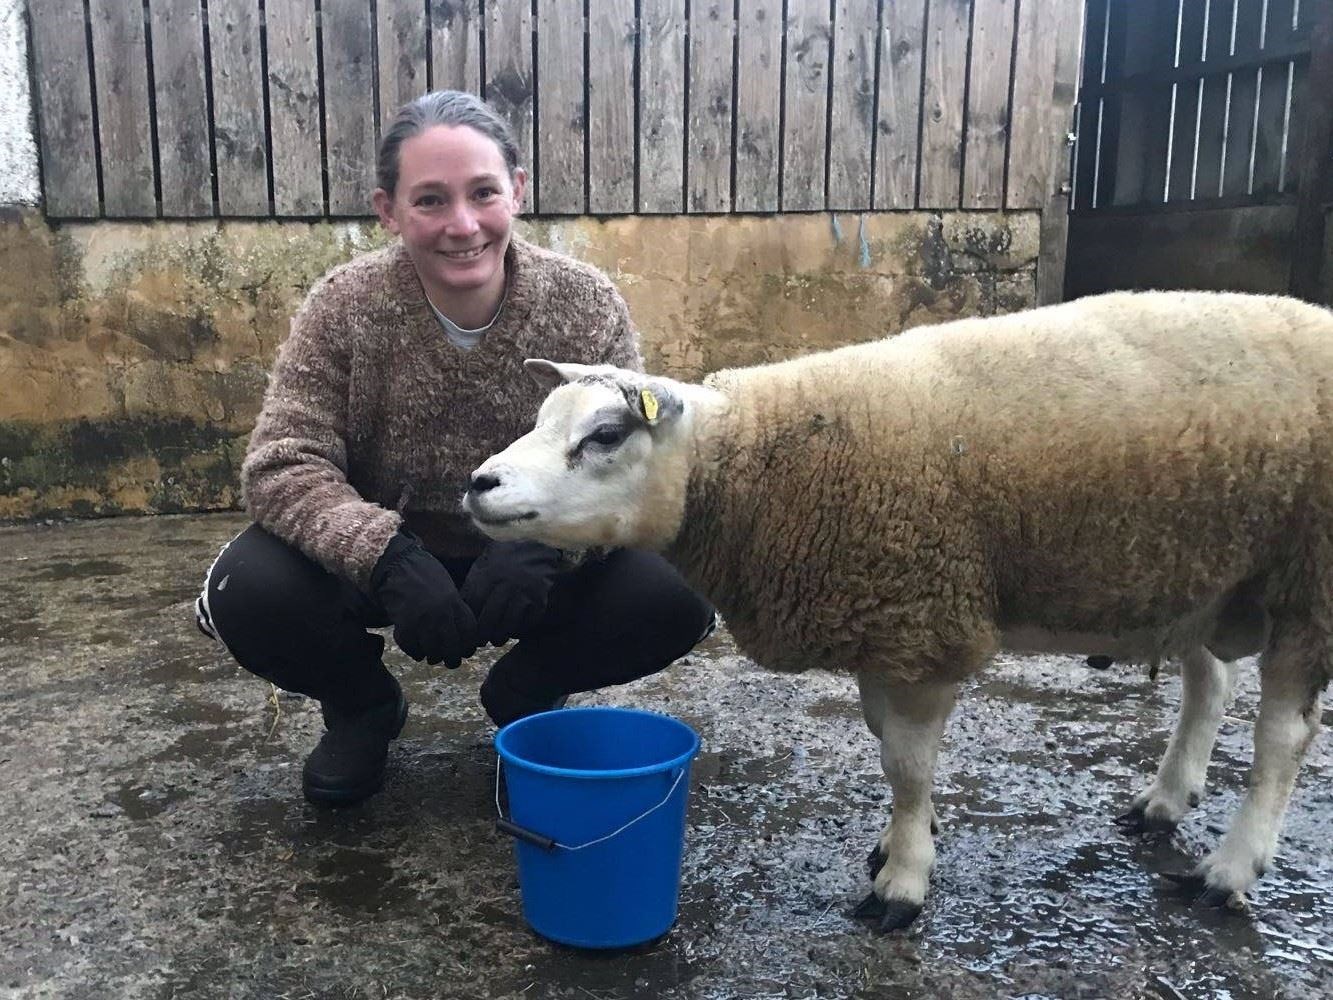 Award winner Helen O'Keefe has established a flock of nearly 100 Shetland sheep. A portion of the flock are crossed with a Beltex ram.